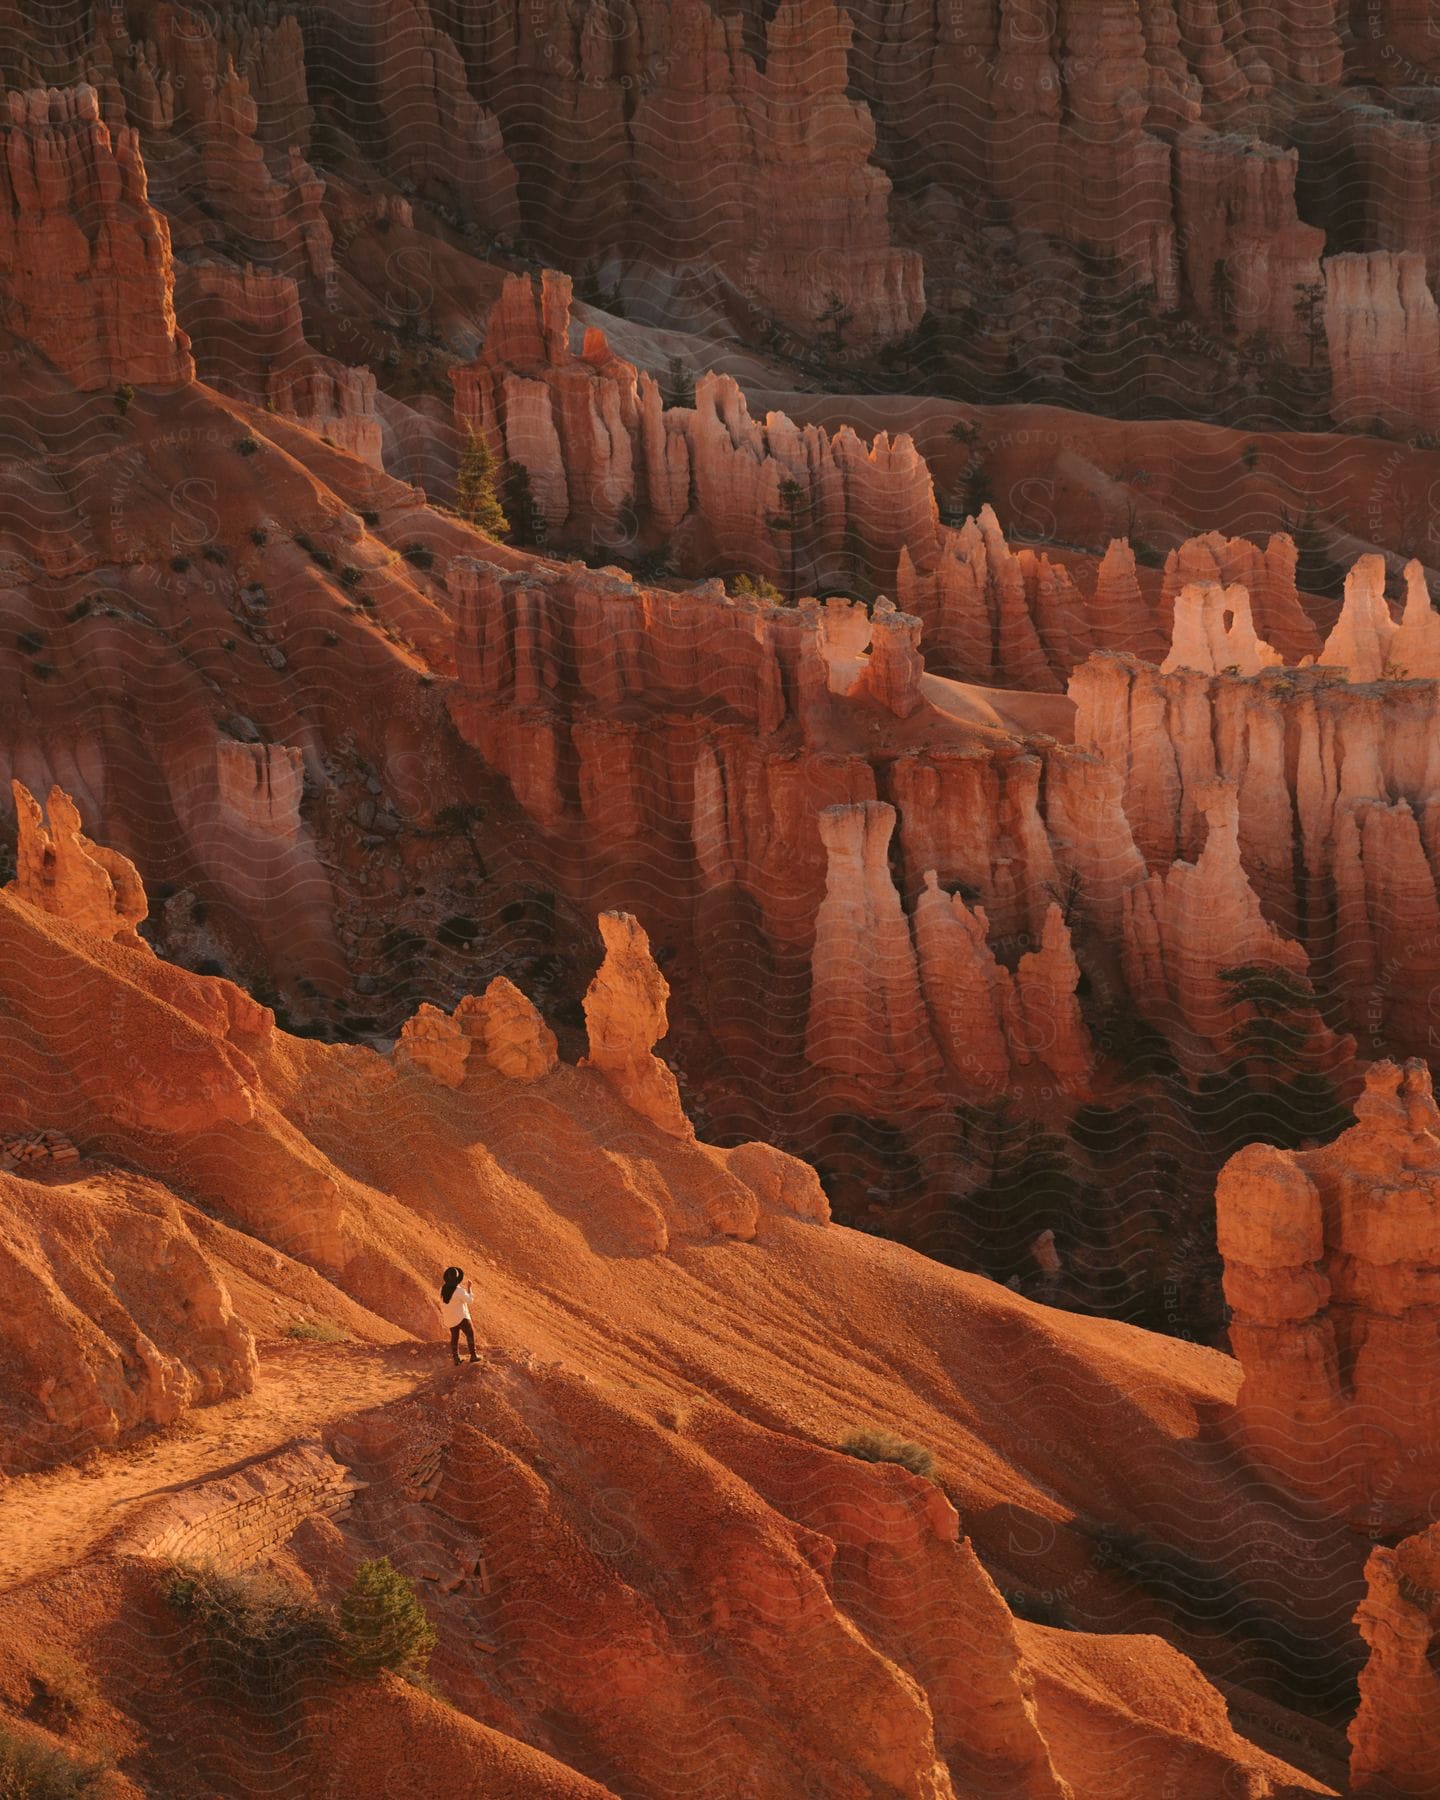 A woman walks among rock formations in the red rock canyons